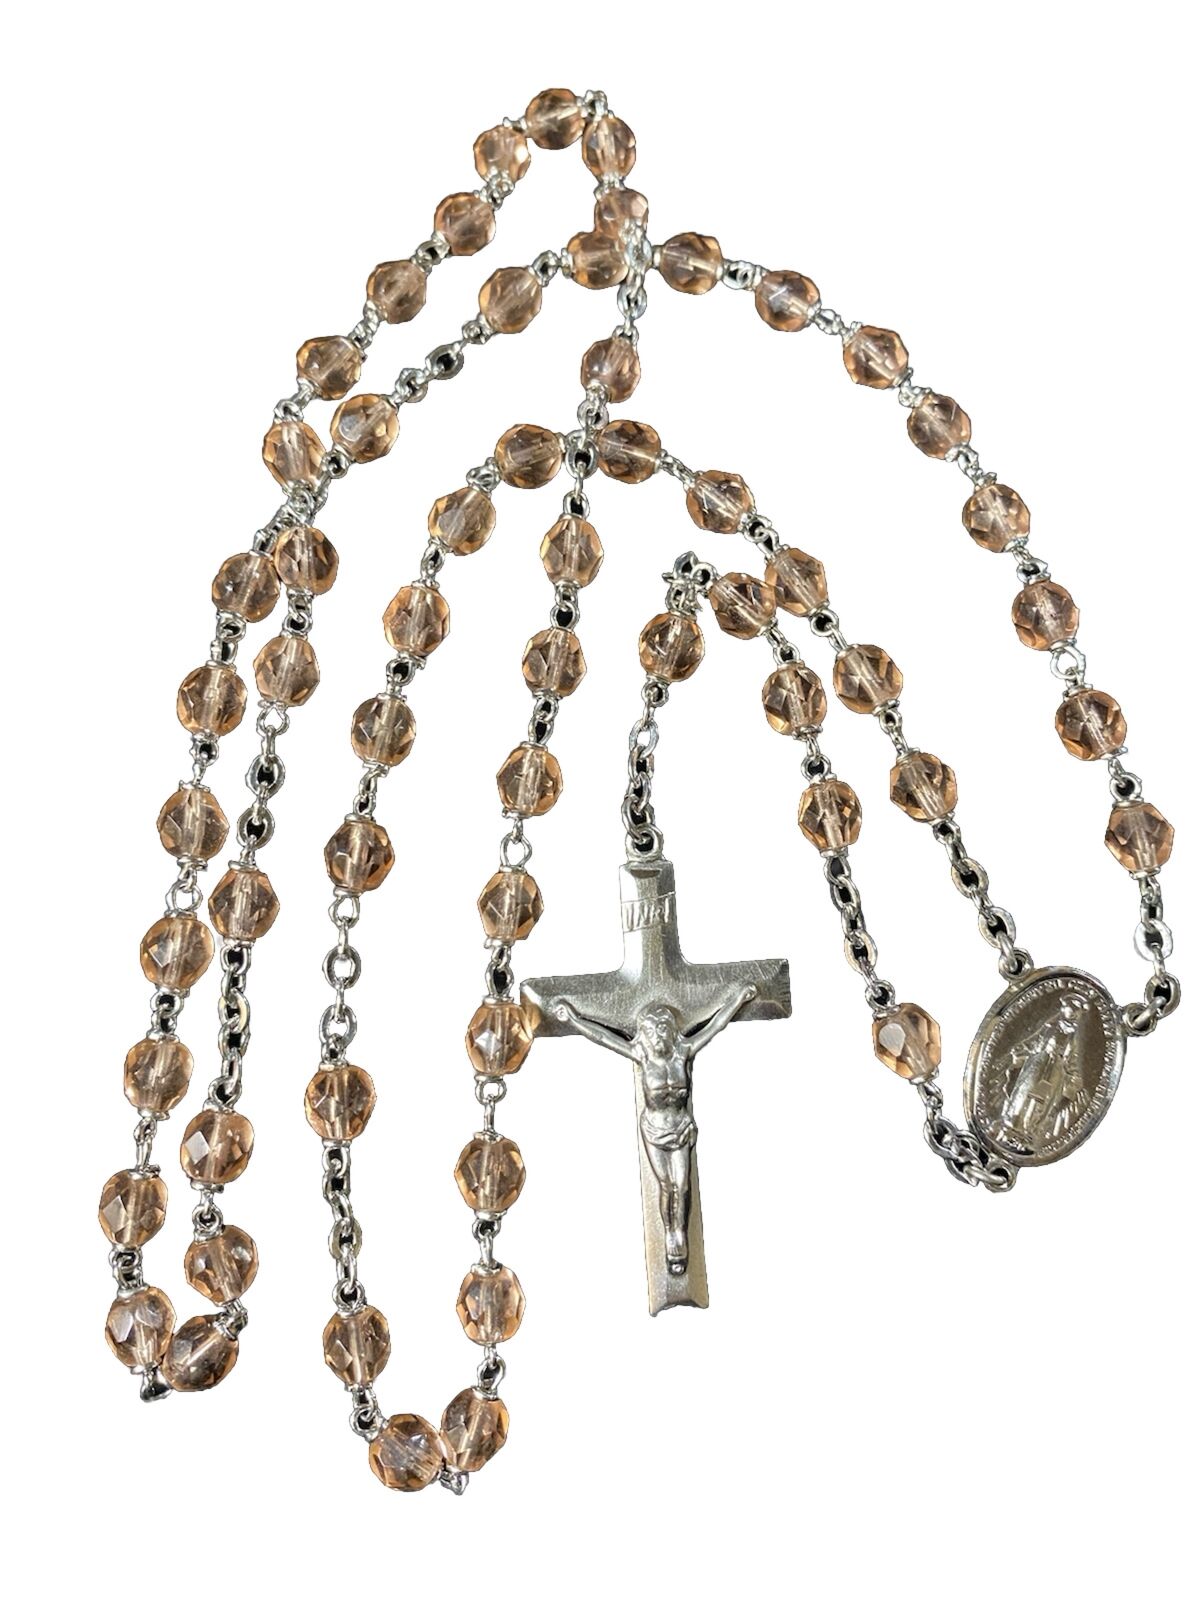 3 Vintage Silver Tone Holy Rosaries Pendants Cross Angel Glass Wood Beads 28 in